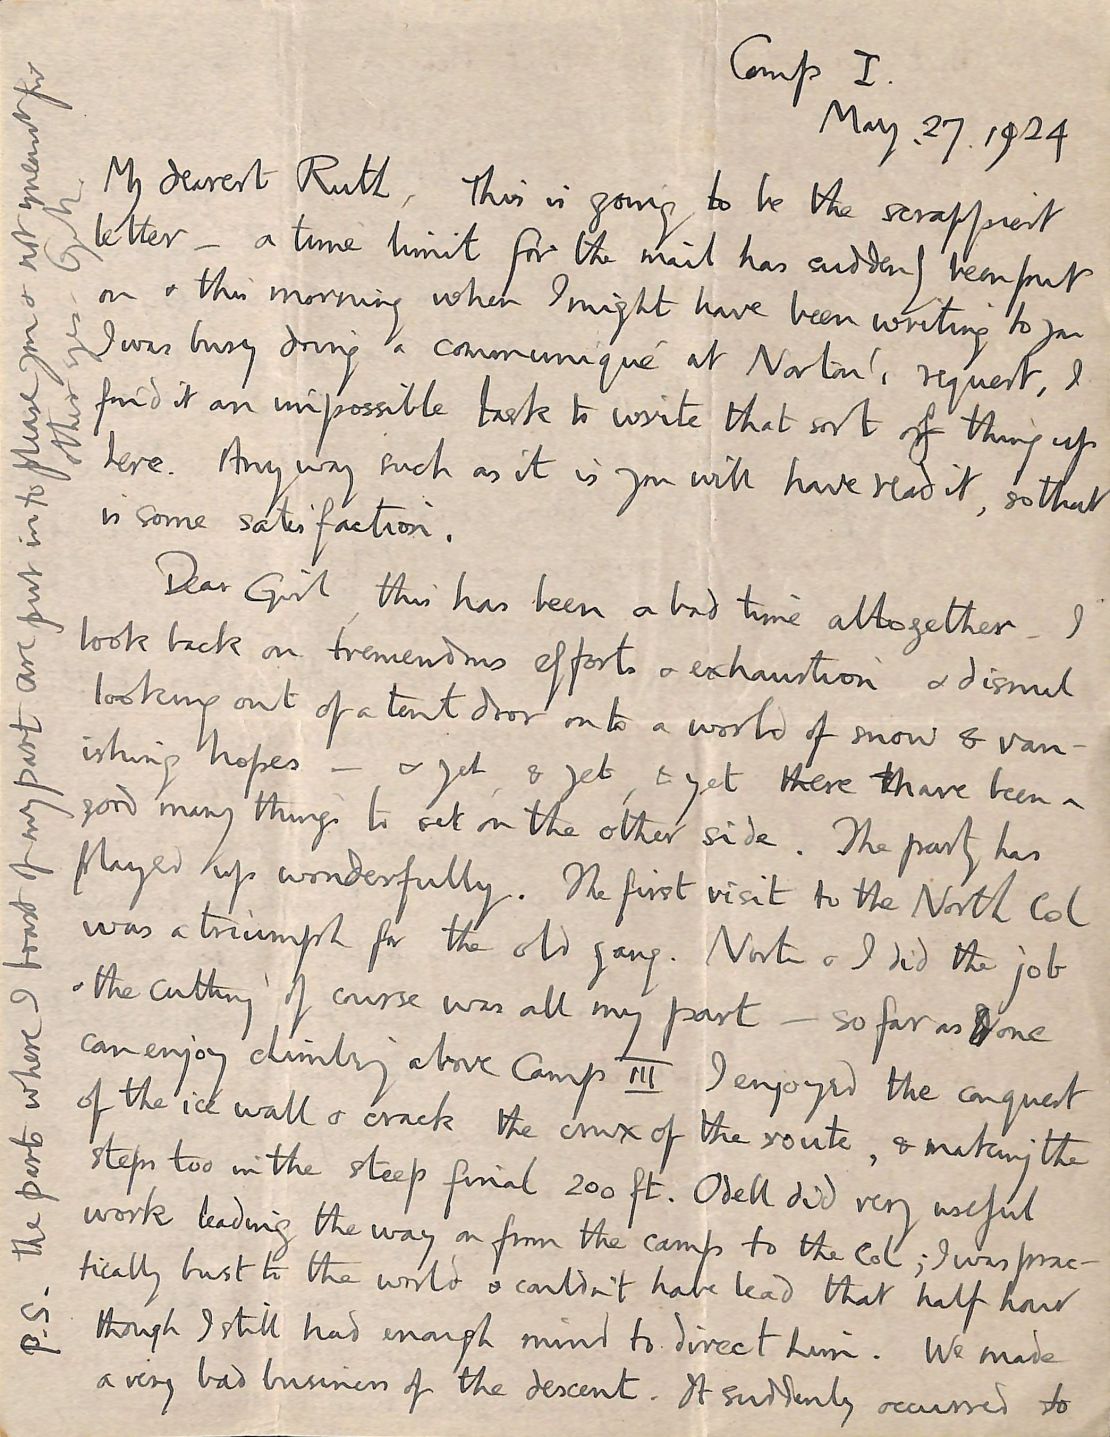 A digitized letter shows part of the final correspondence that Mallory wrote to his wife, Ruth, dated May 27, 1924, as he revealed looking 